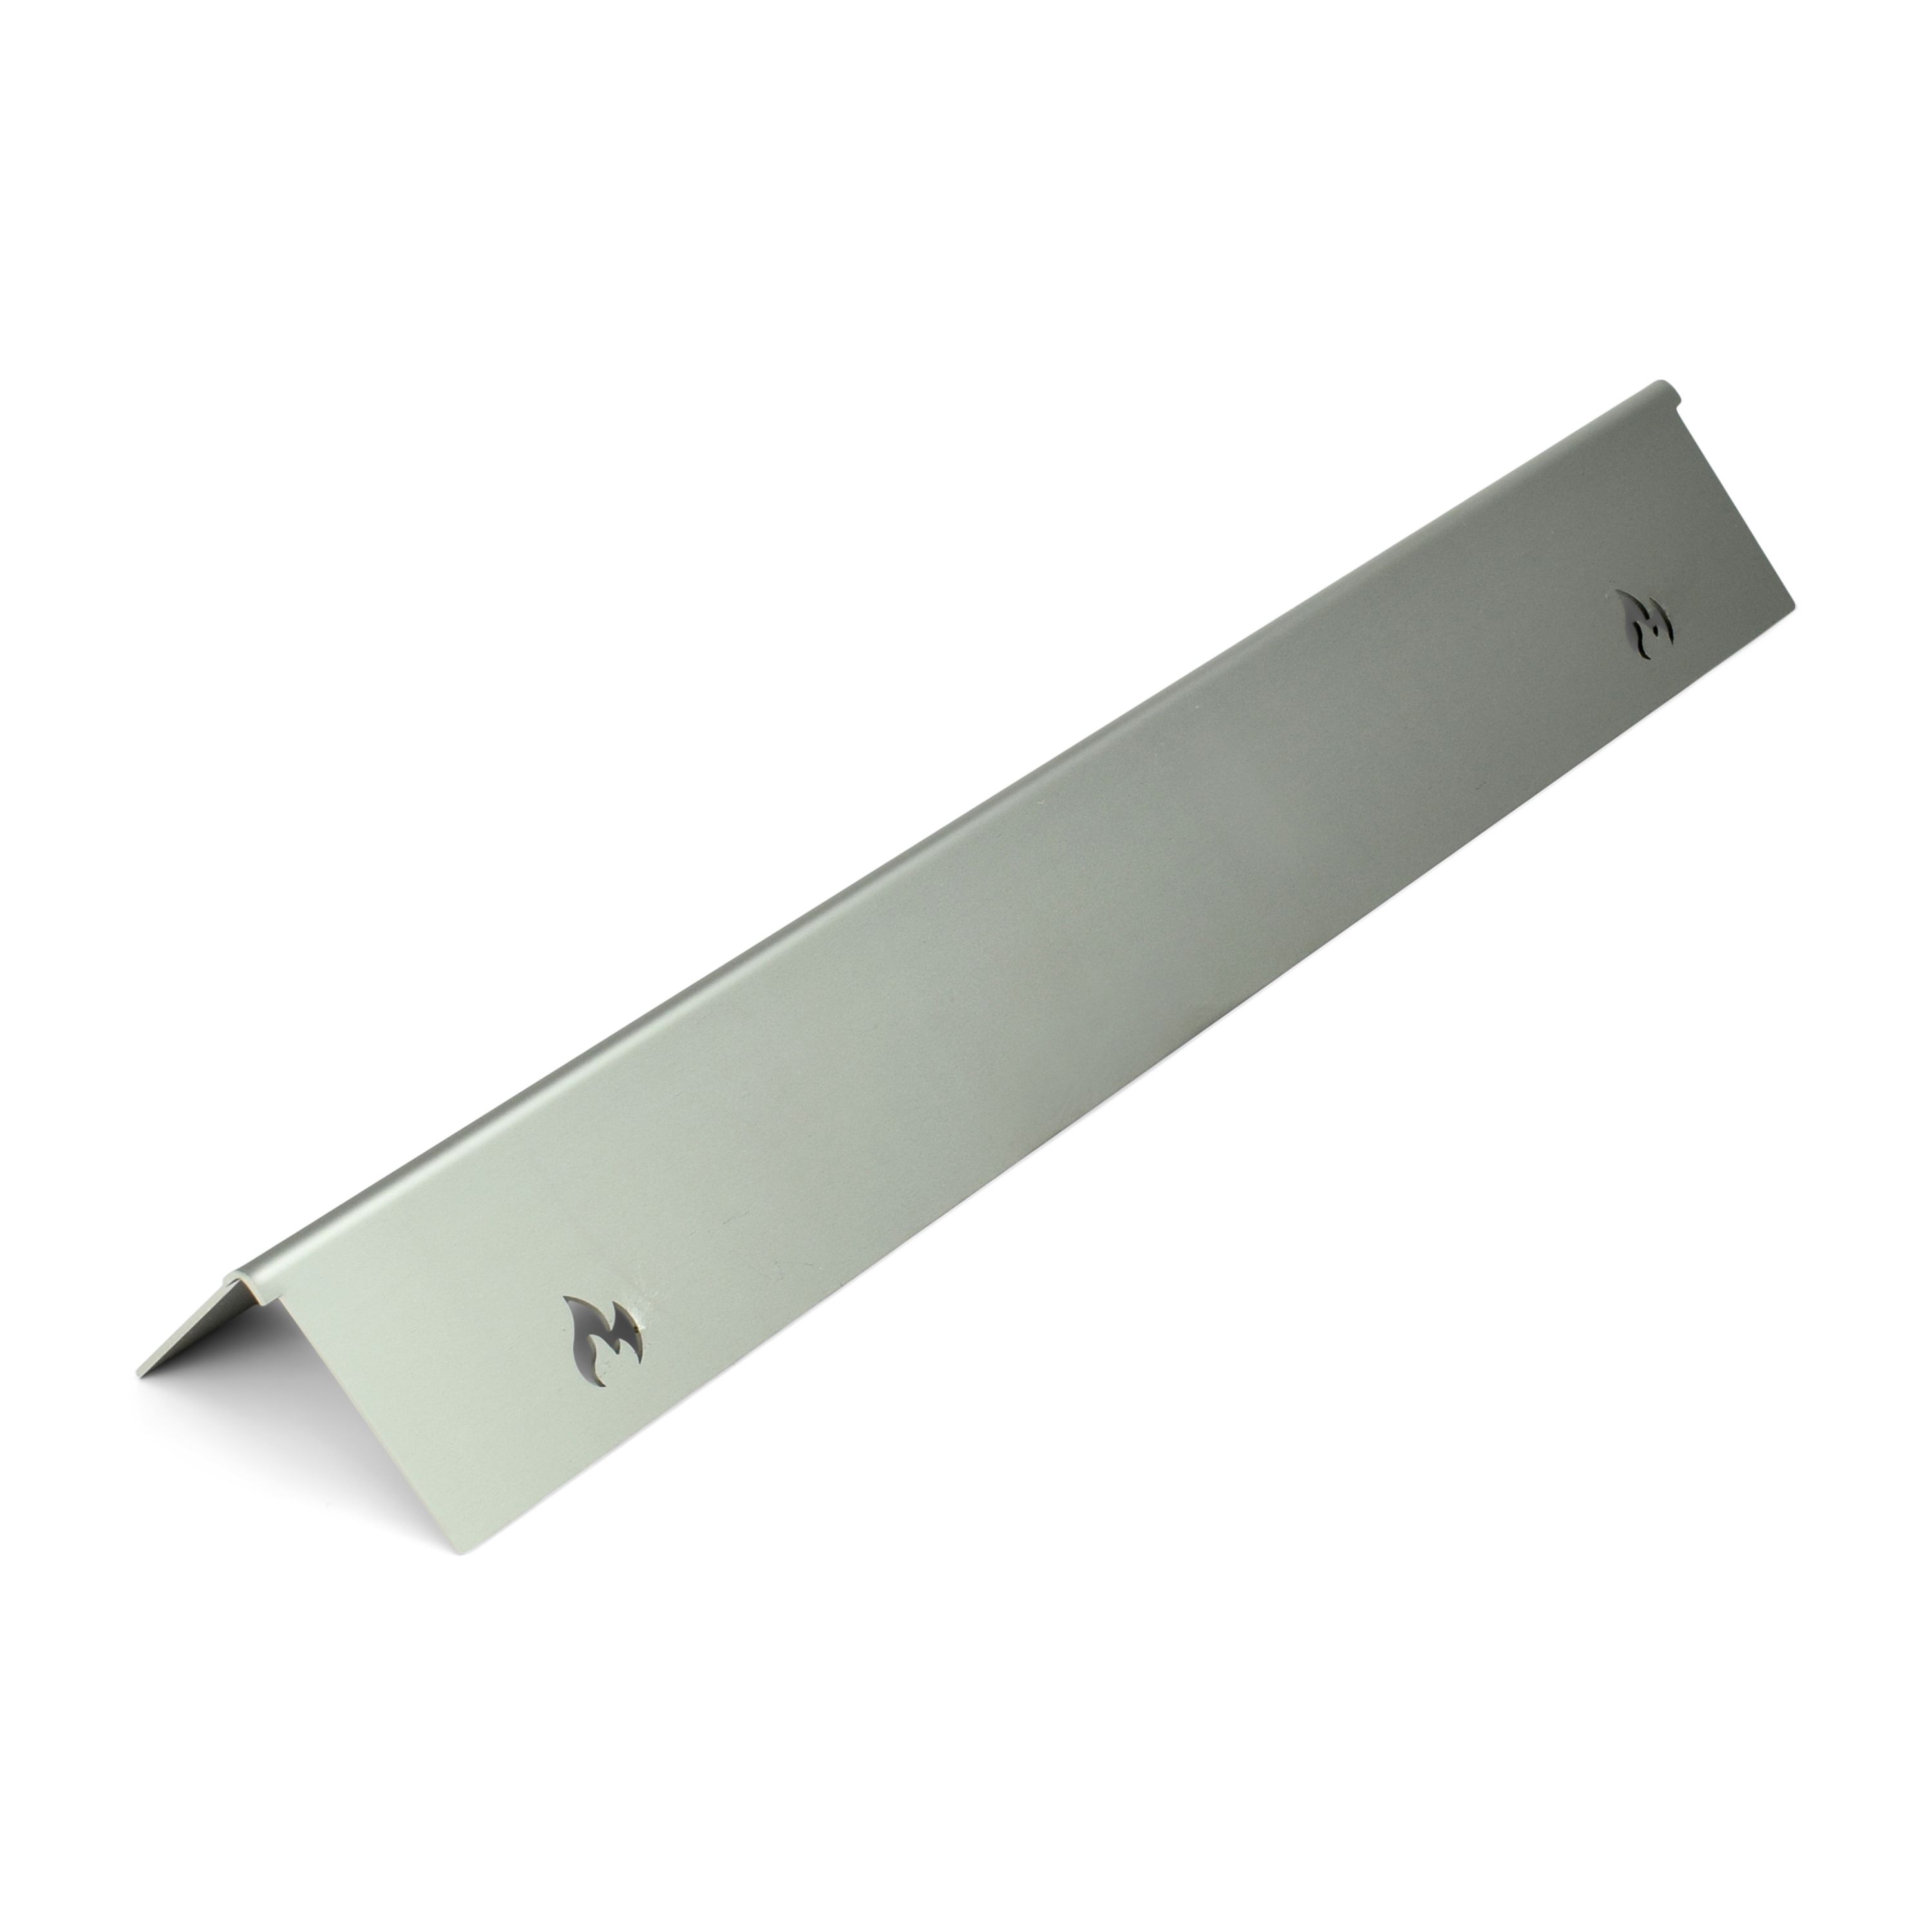 Stainless steel aroma rail for Napoleon Burner cover for Rogue Prestige and Prestige Pro